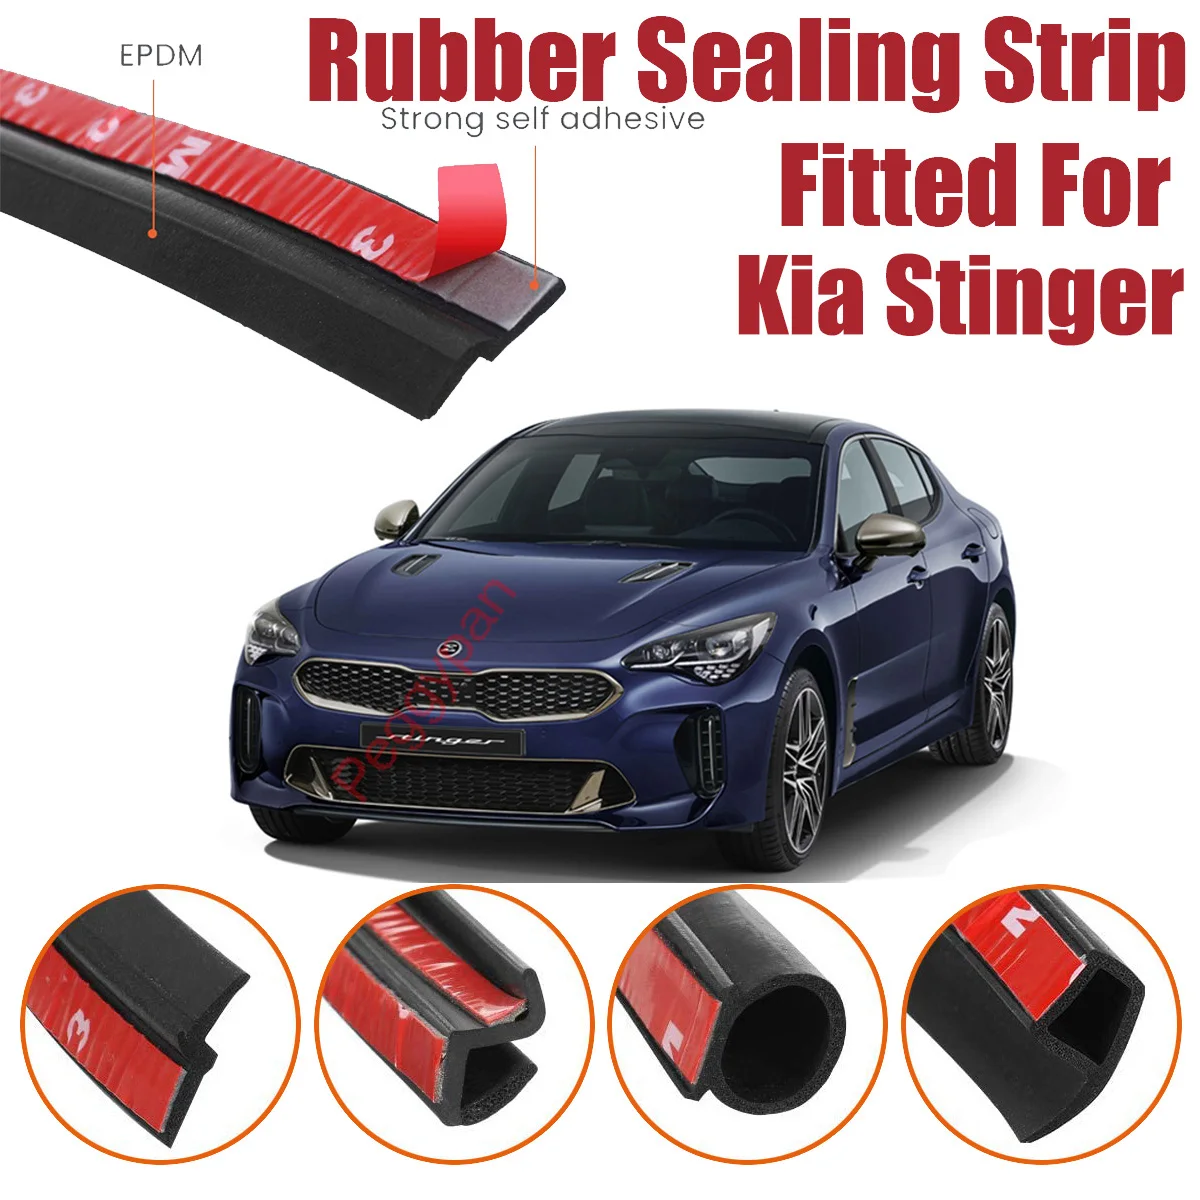 door-seal-strip-kit-self-adhesive-window-engine-cover-soundproof-rubber-weather-draft-wind-noise-reduction-fit-for-kia-stinger